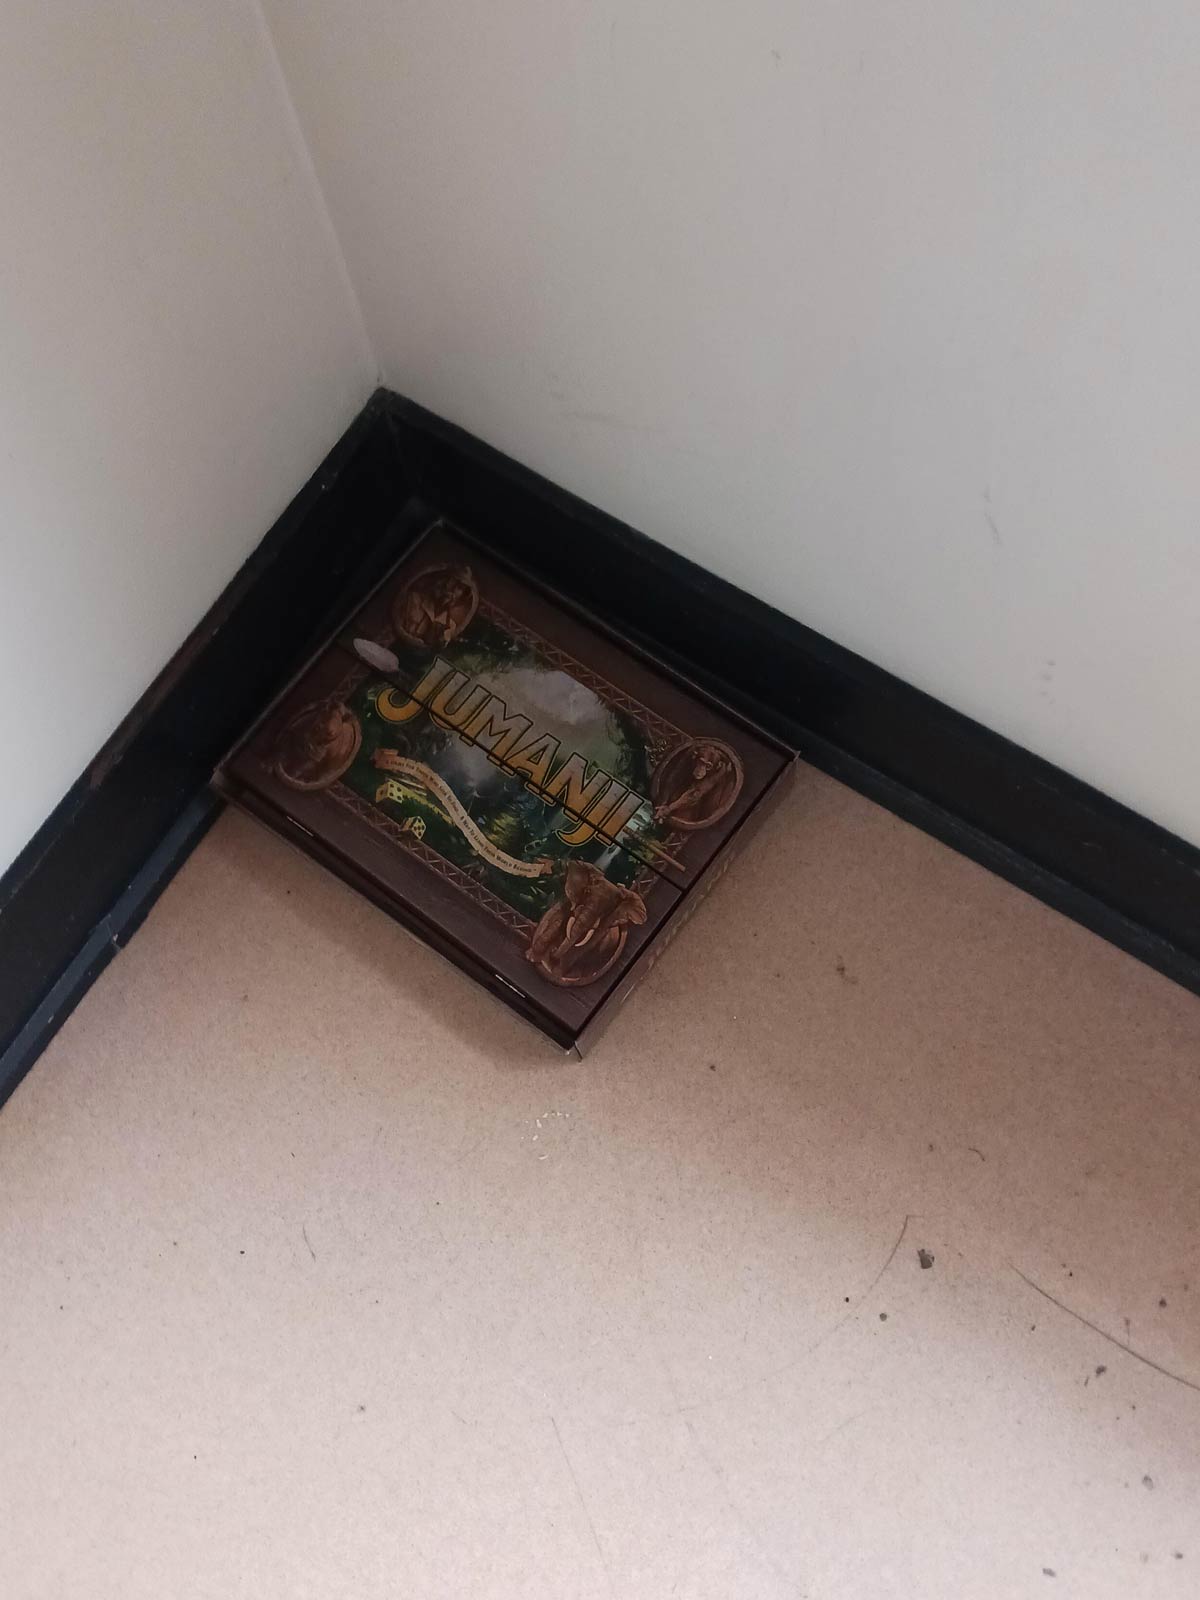 Jumanji board game abandoned in my apartment complex